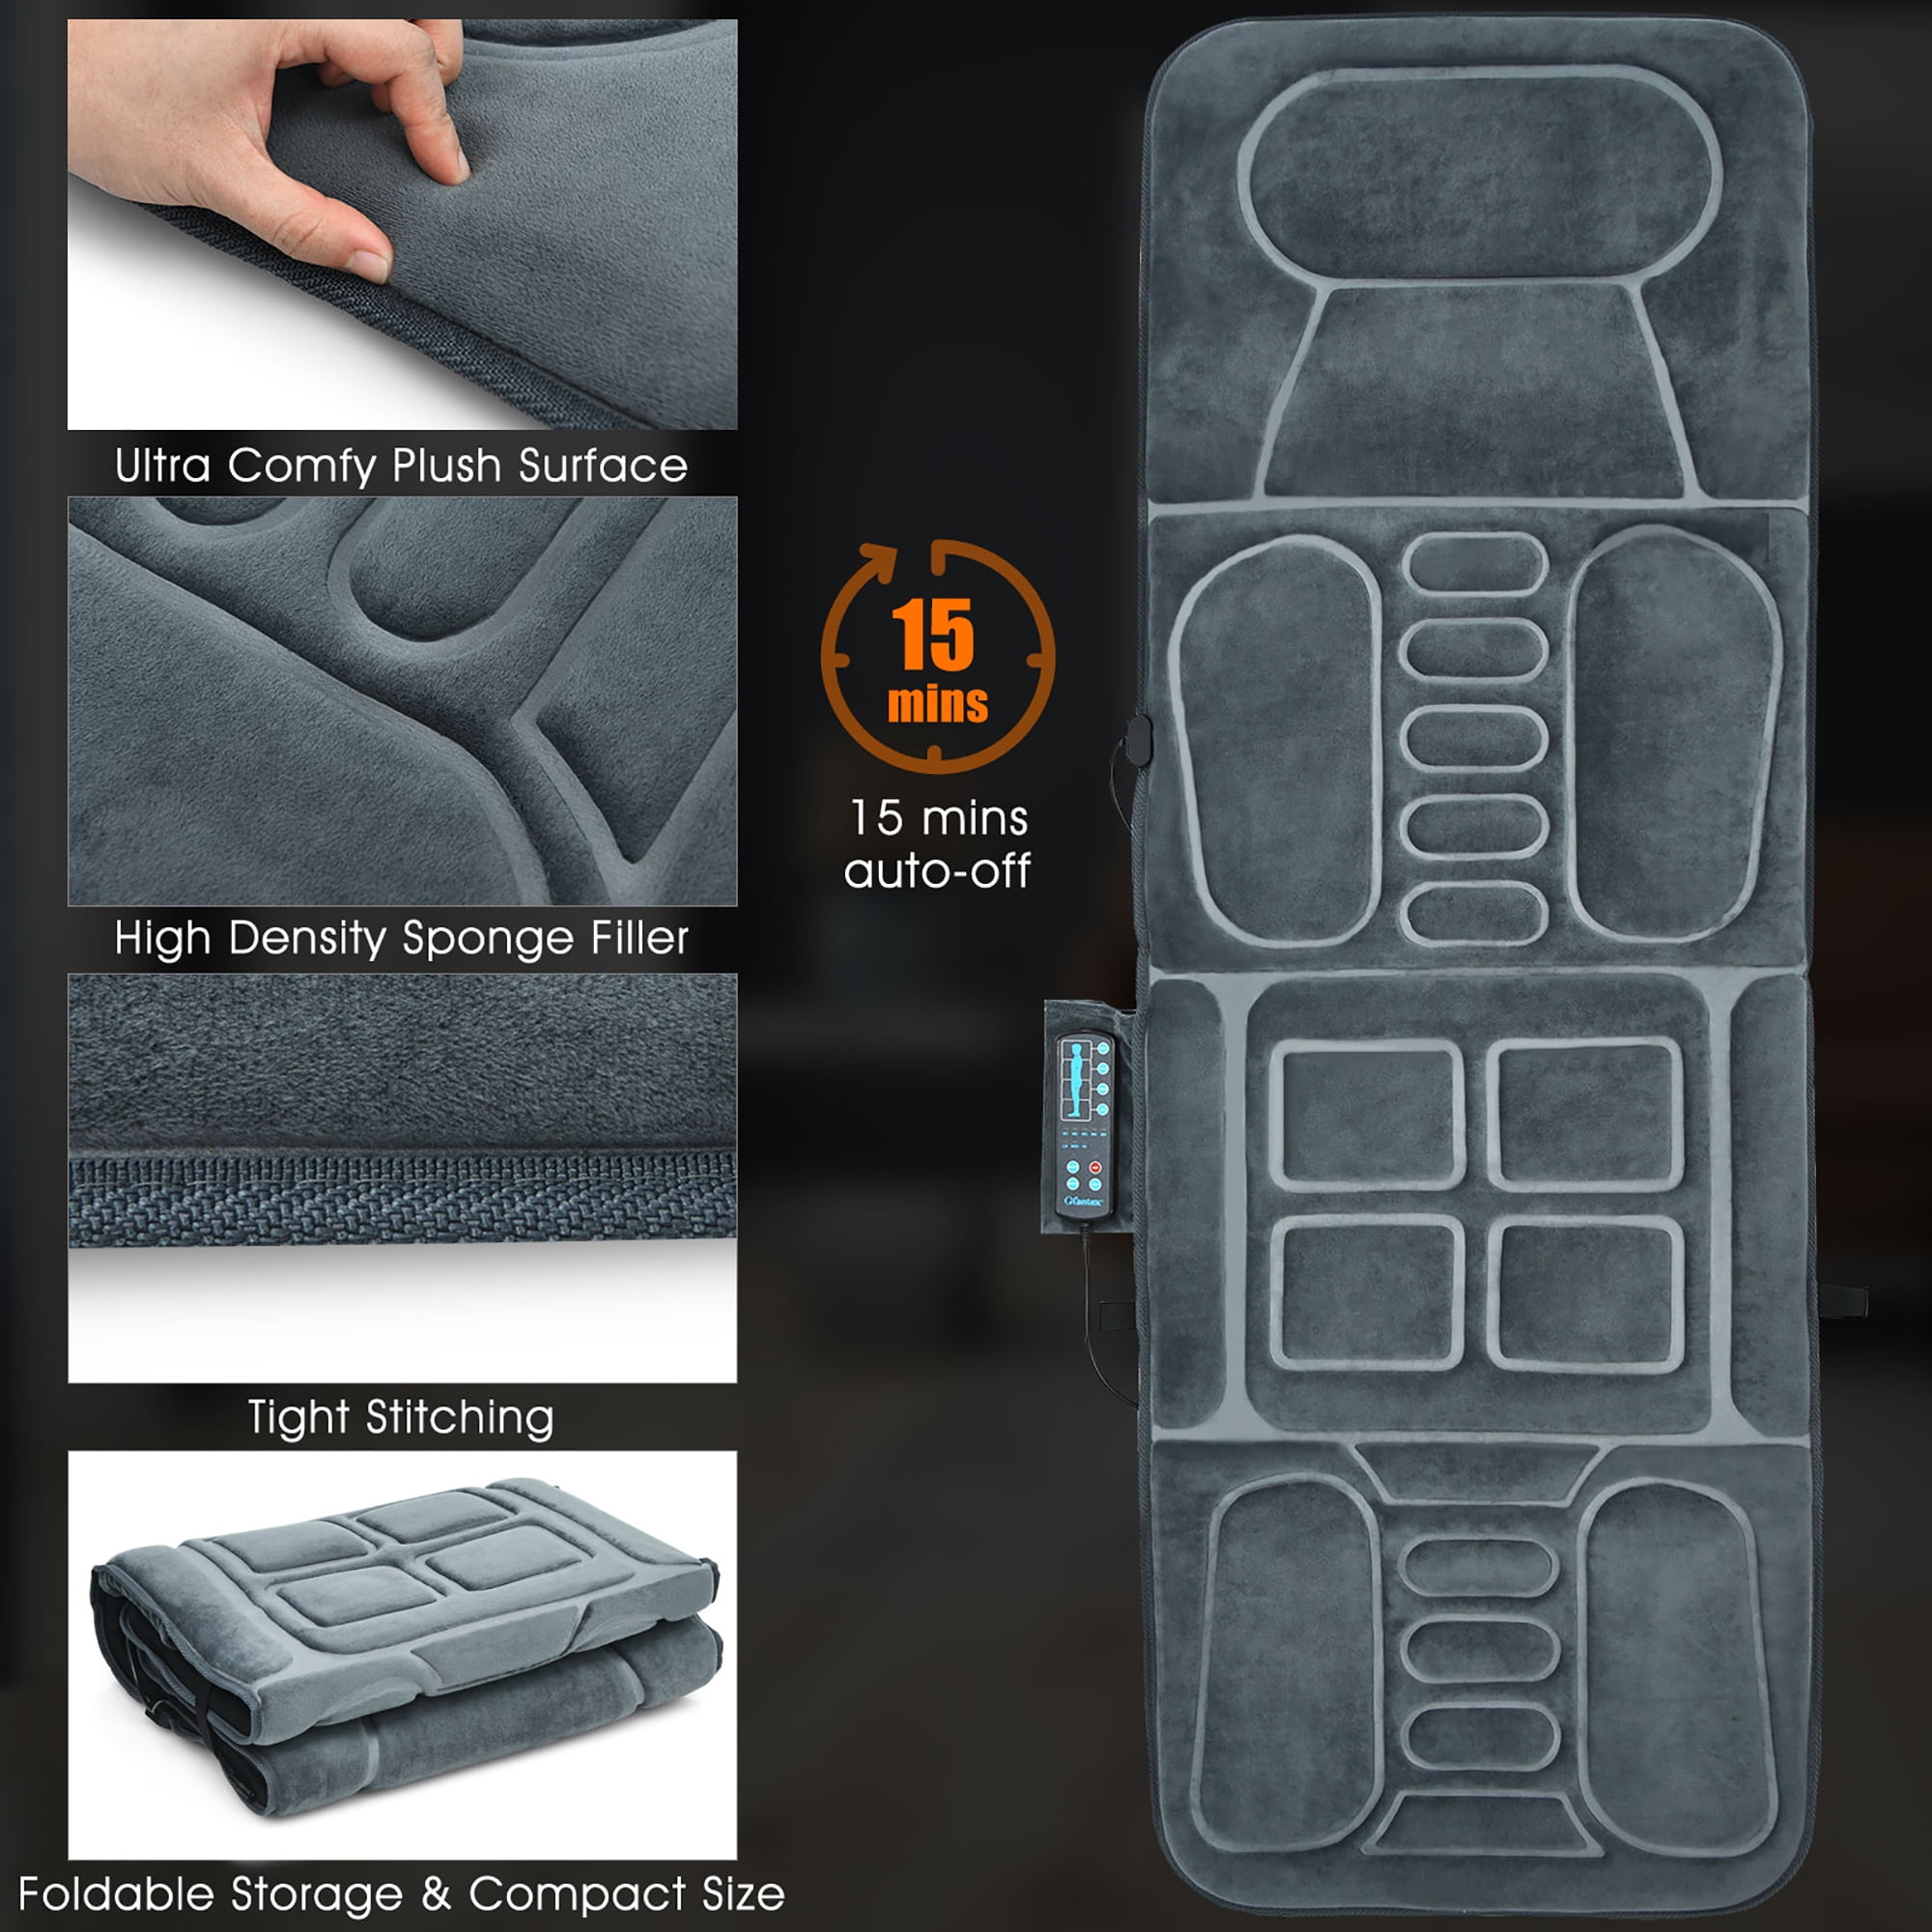 The Any Surface Full Body Massage Pad